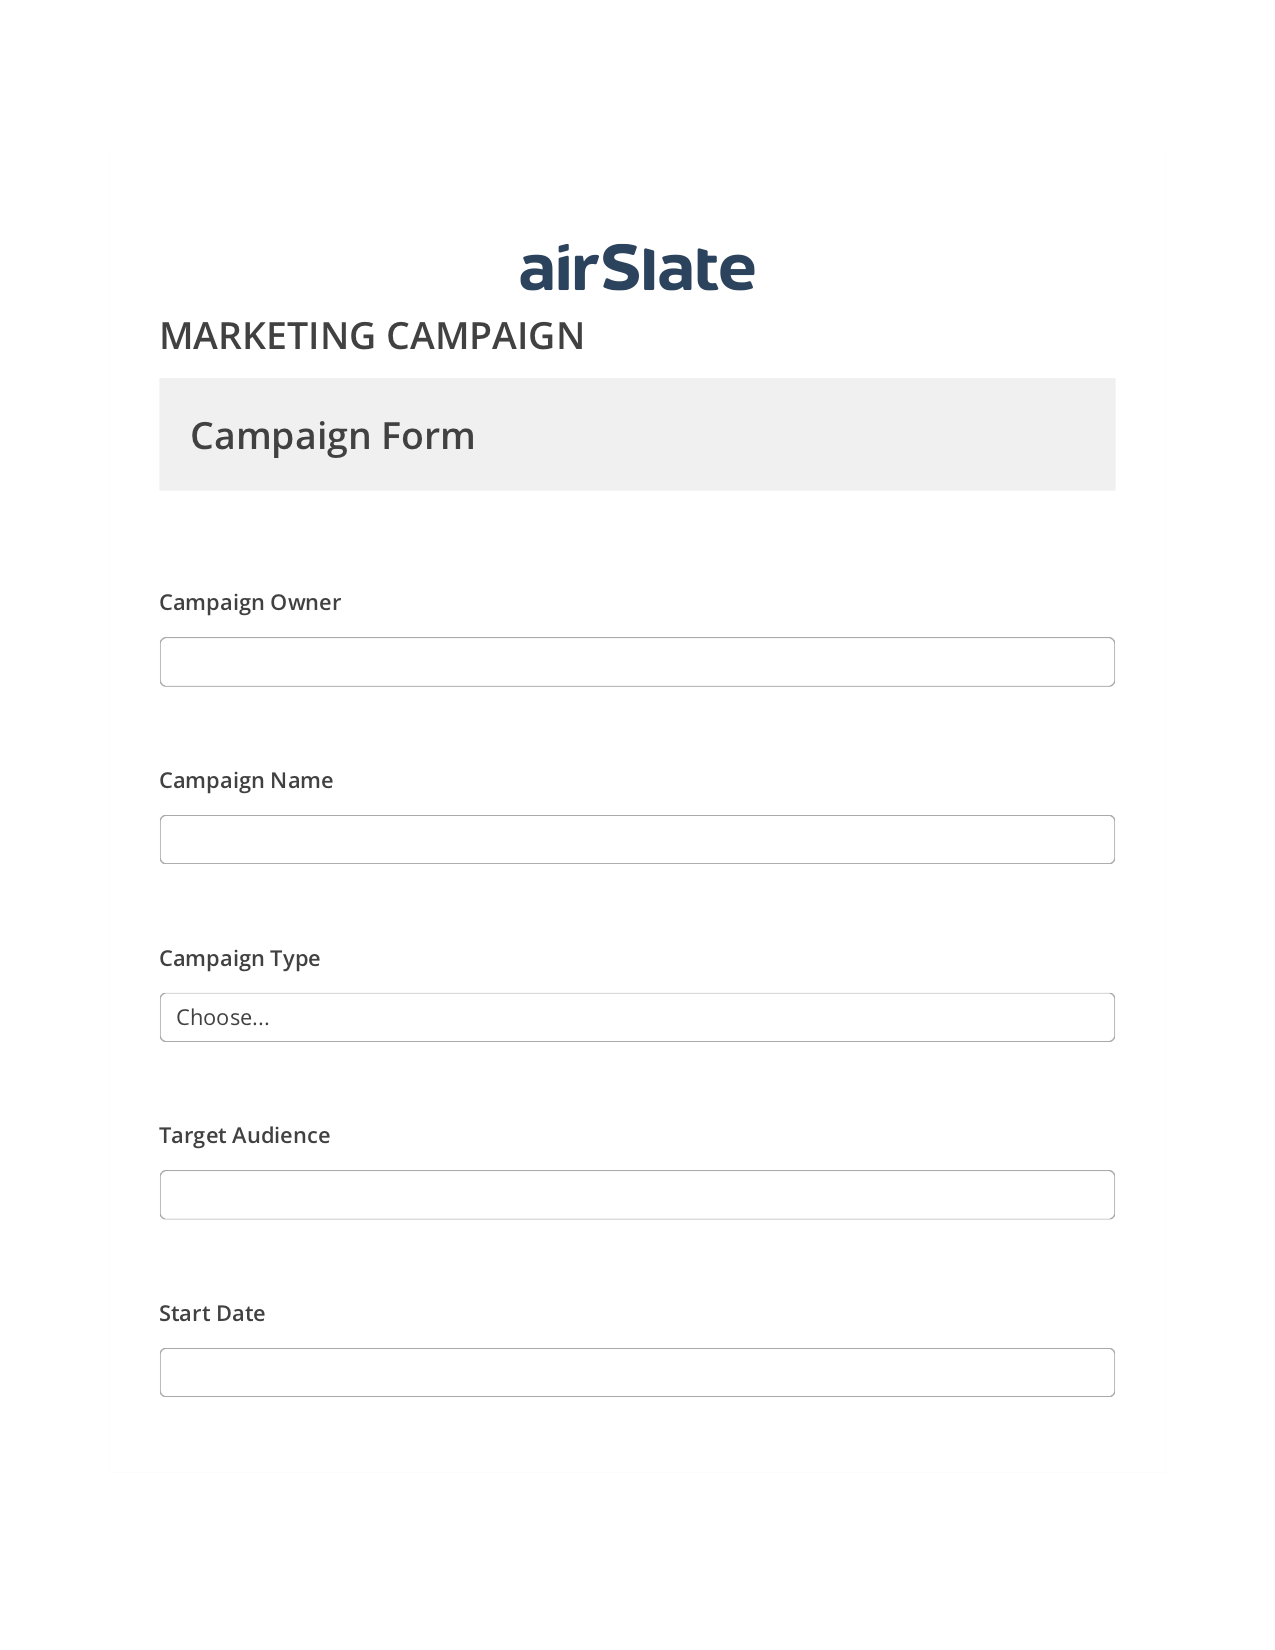 Marketing Campaign Flow Pre-fill from another Slate Bot